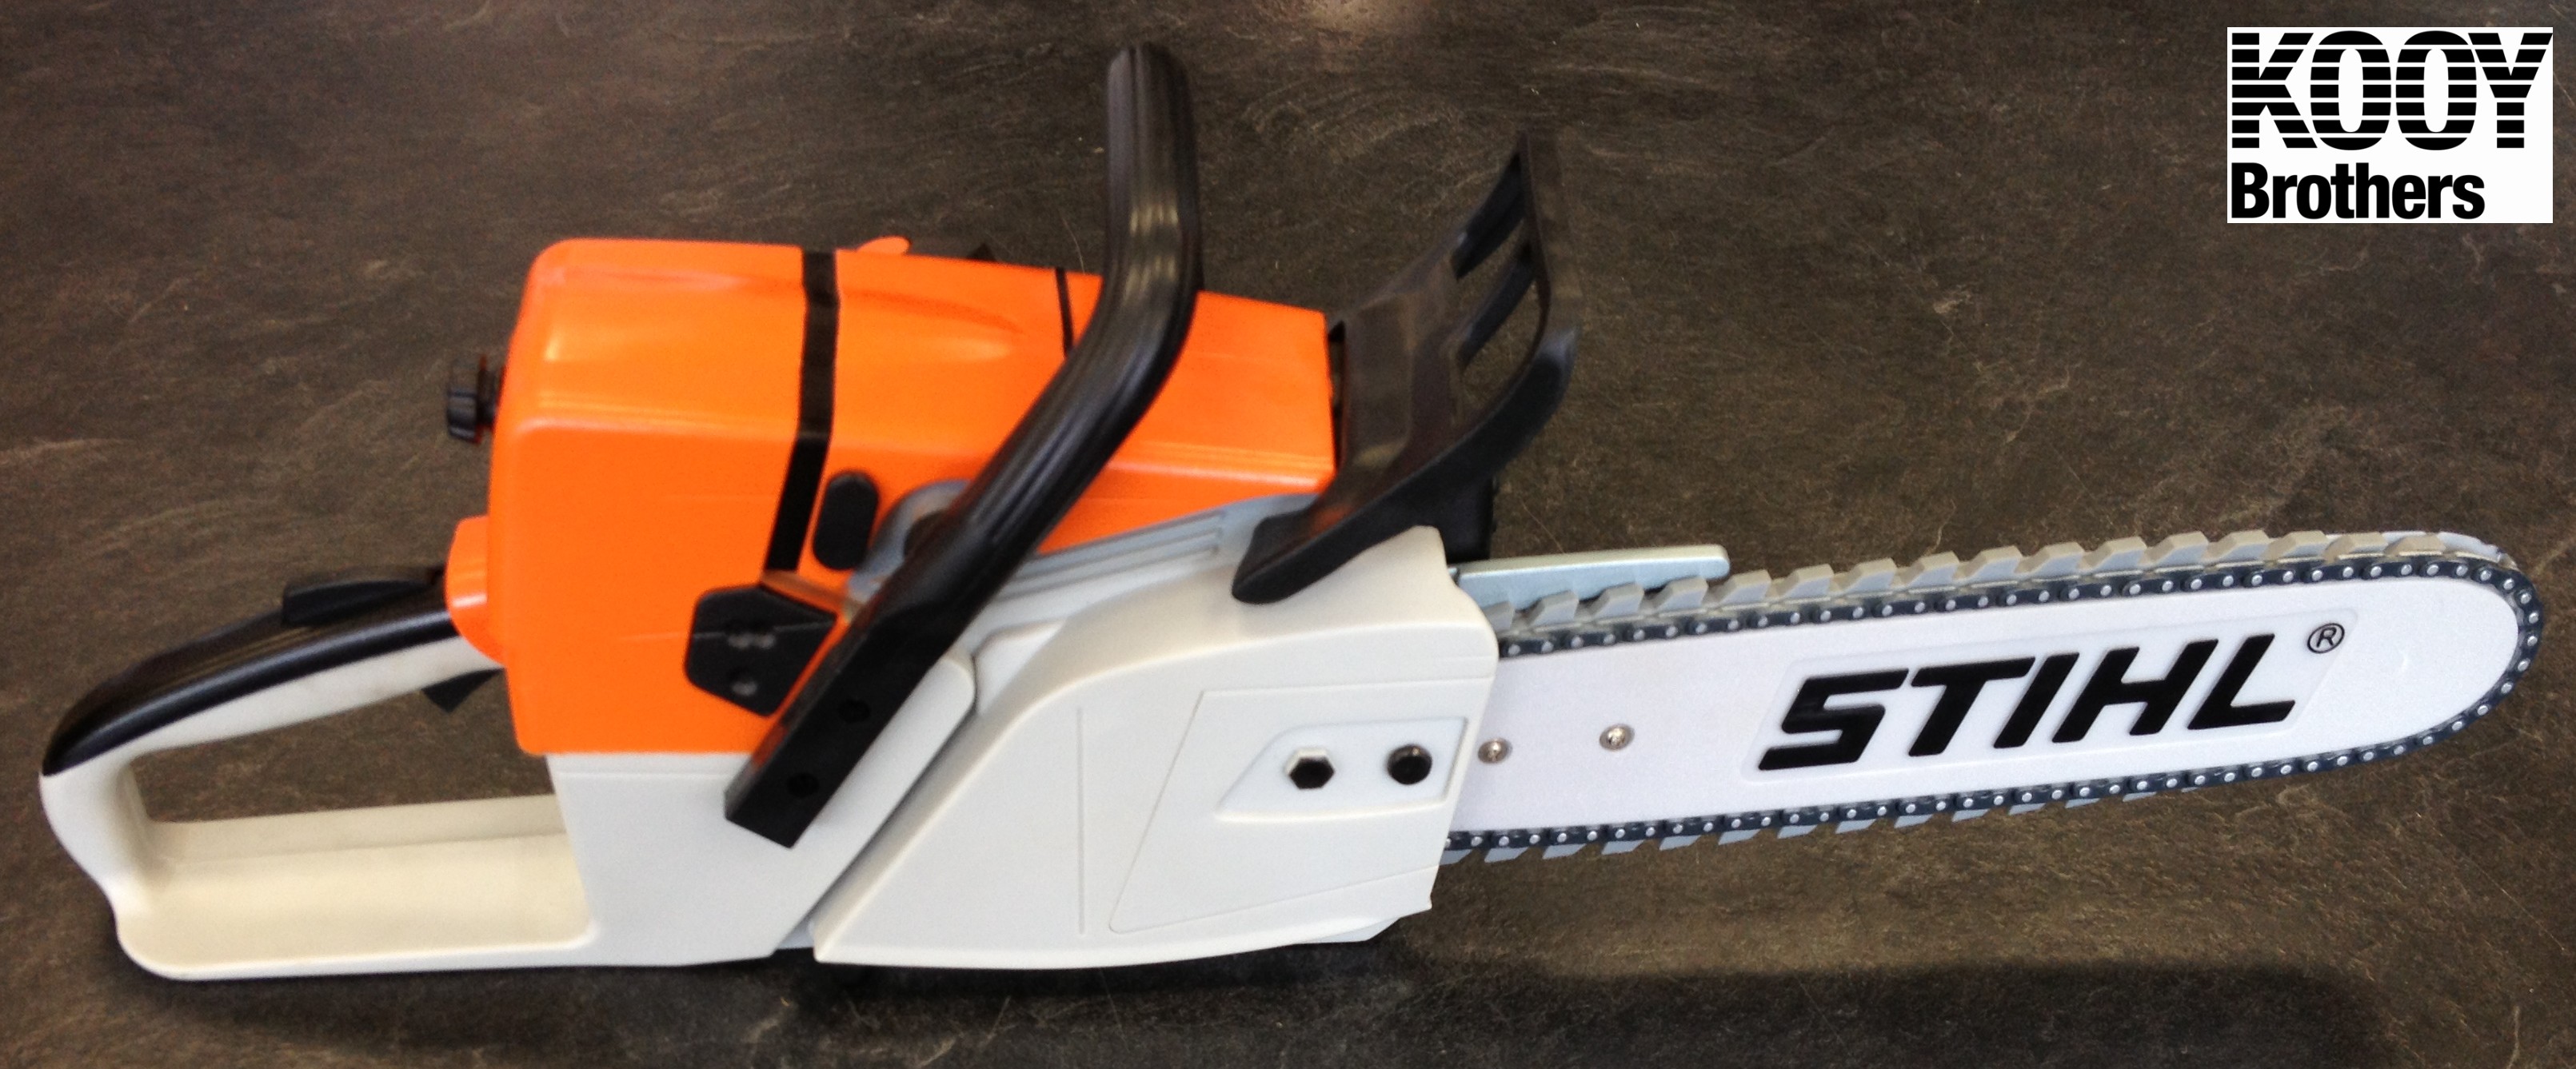 STIHL Toy Chainsaw | Lawn Equipment | Snow Removal Equipment ...